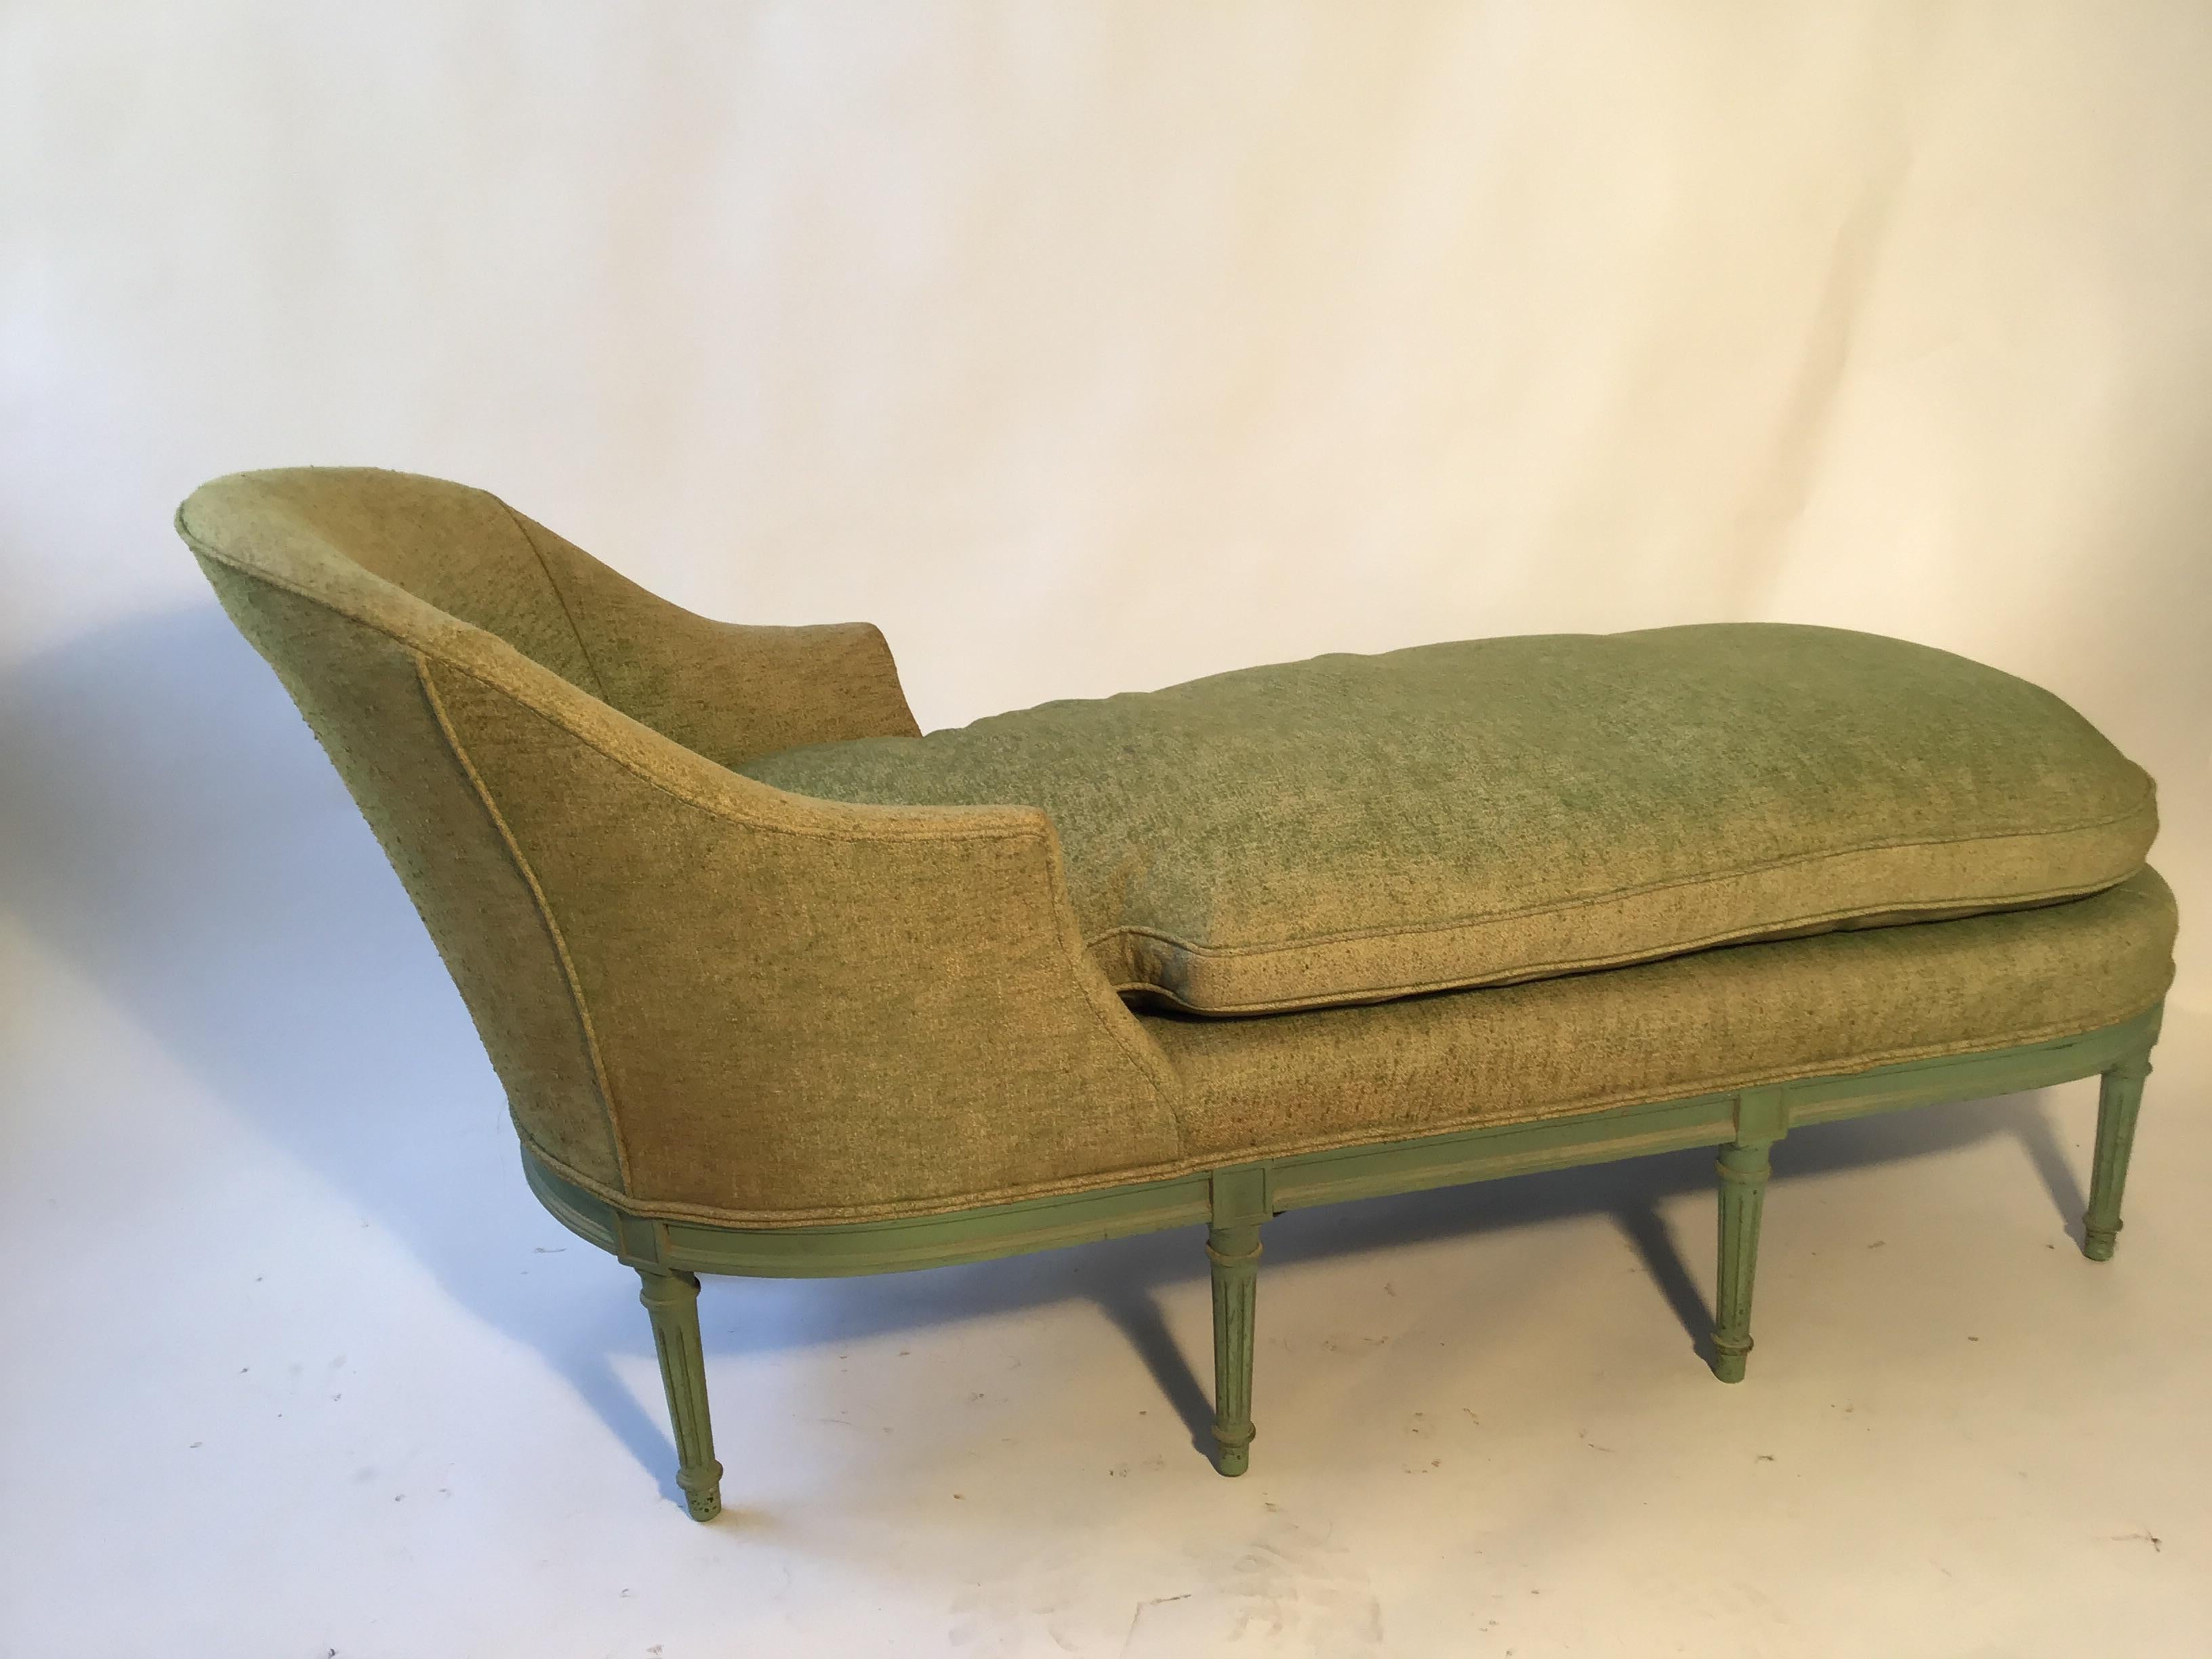 1920s French Louis XVI down chaise lounges. Needs reupholstering.